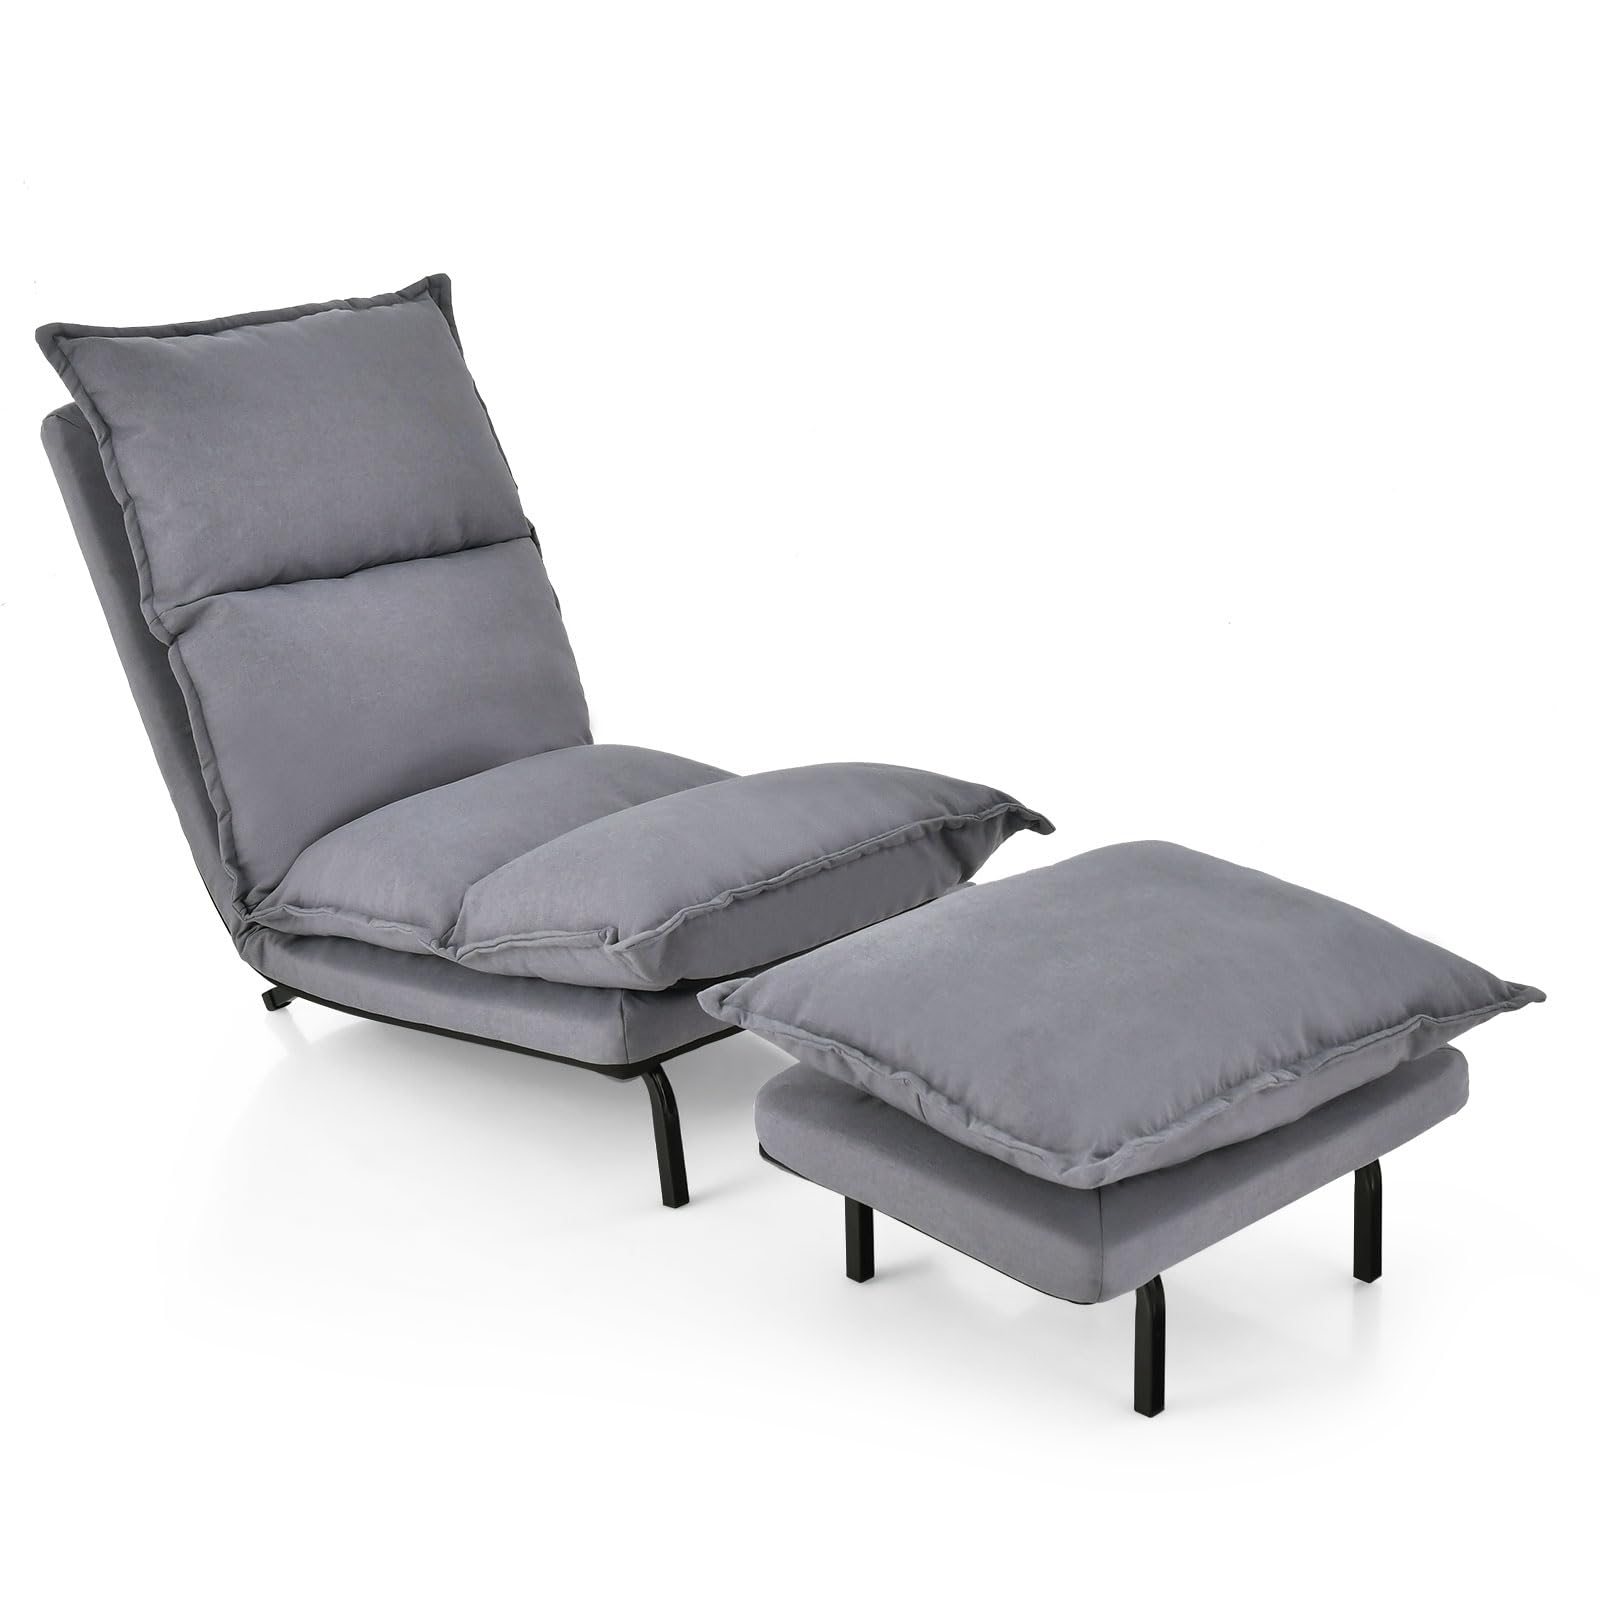 Giantex Accent Chair with Ottoman Gray, Upholstered Lazy Sofa Chair with Ottoman